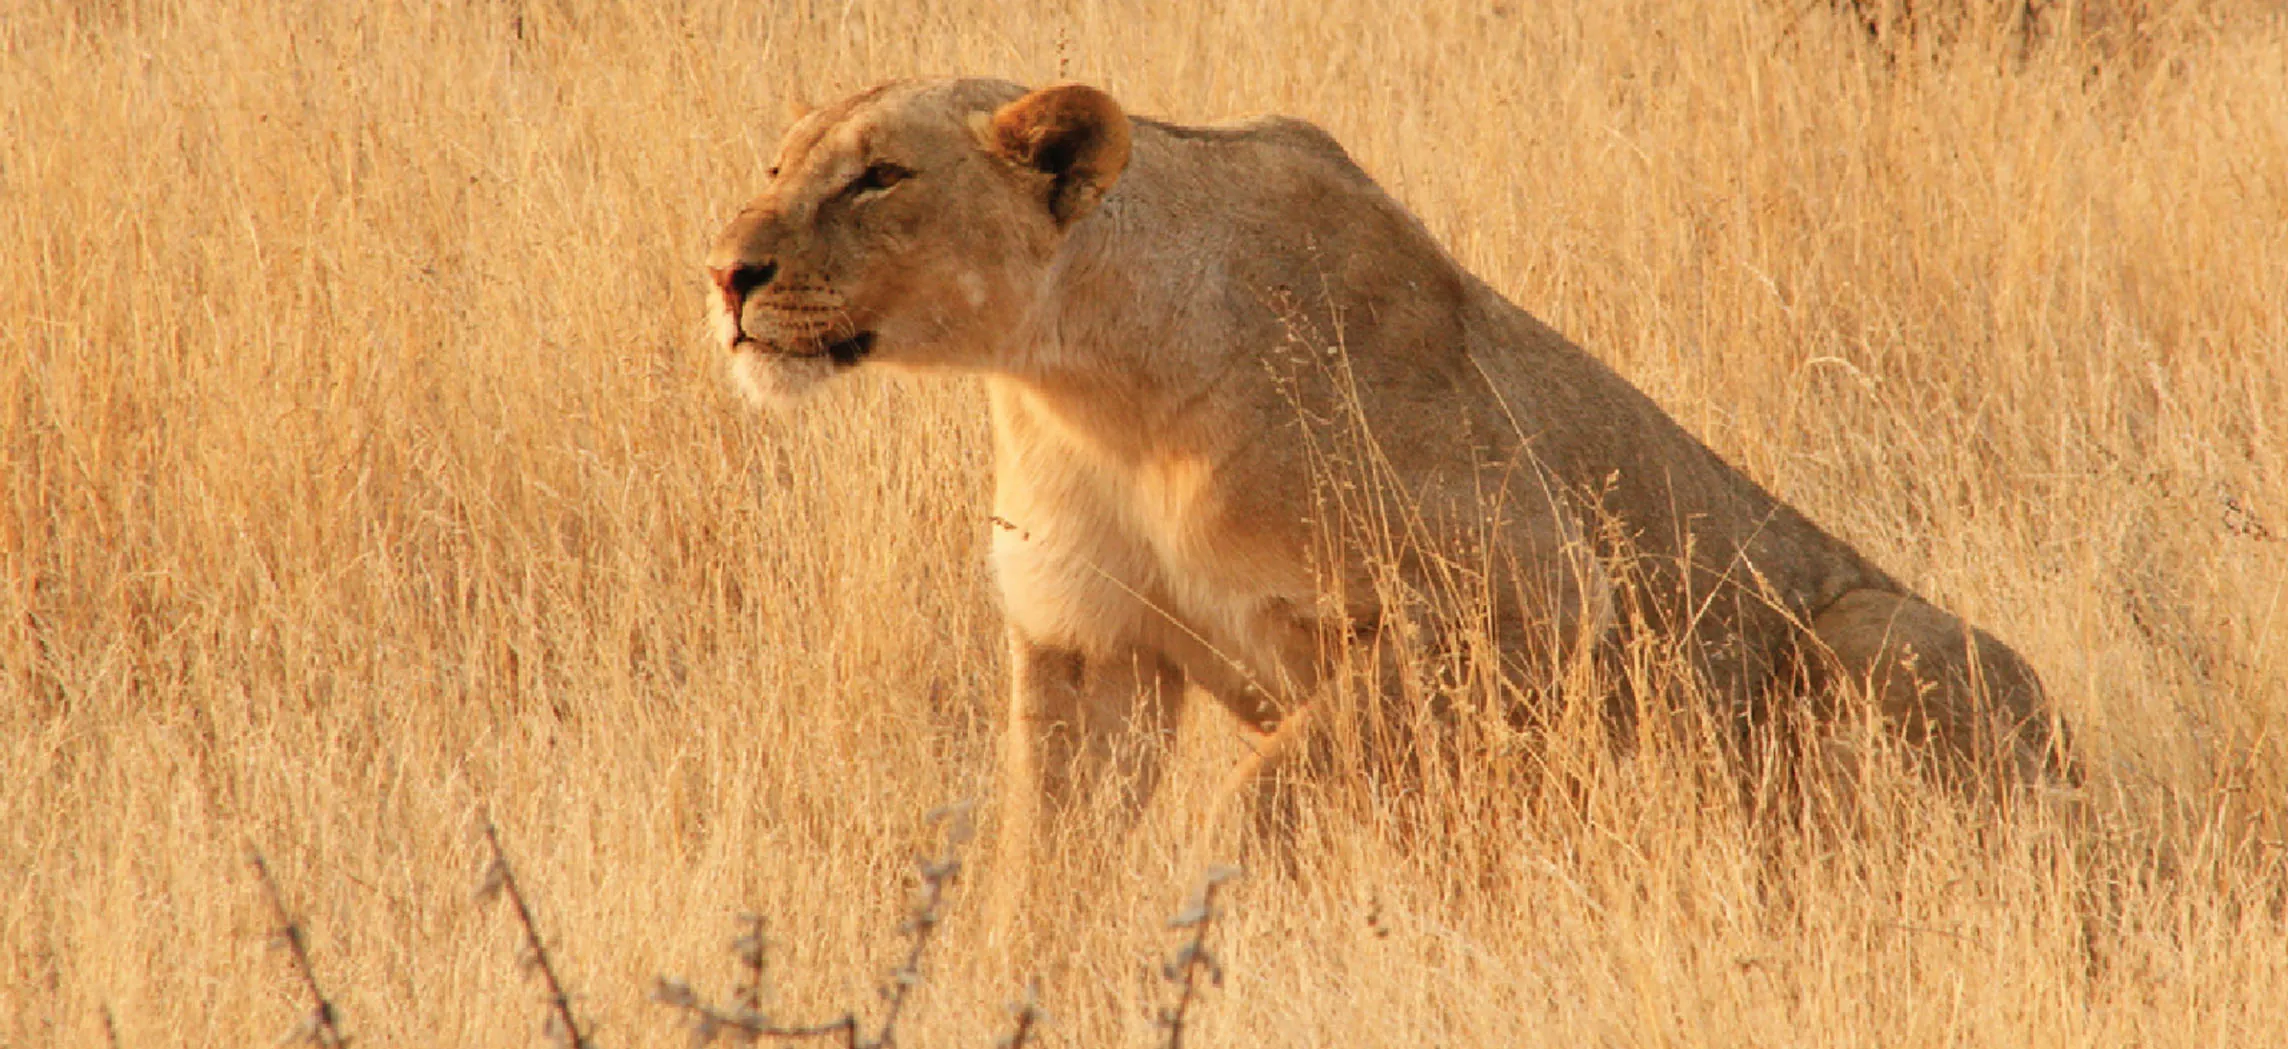 This photograph shows a lioness.